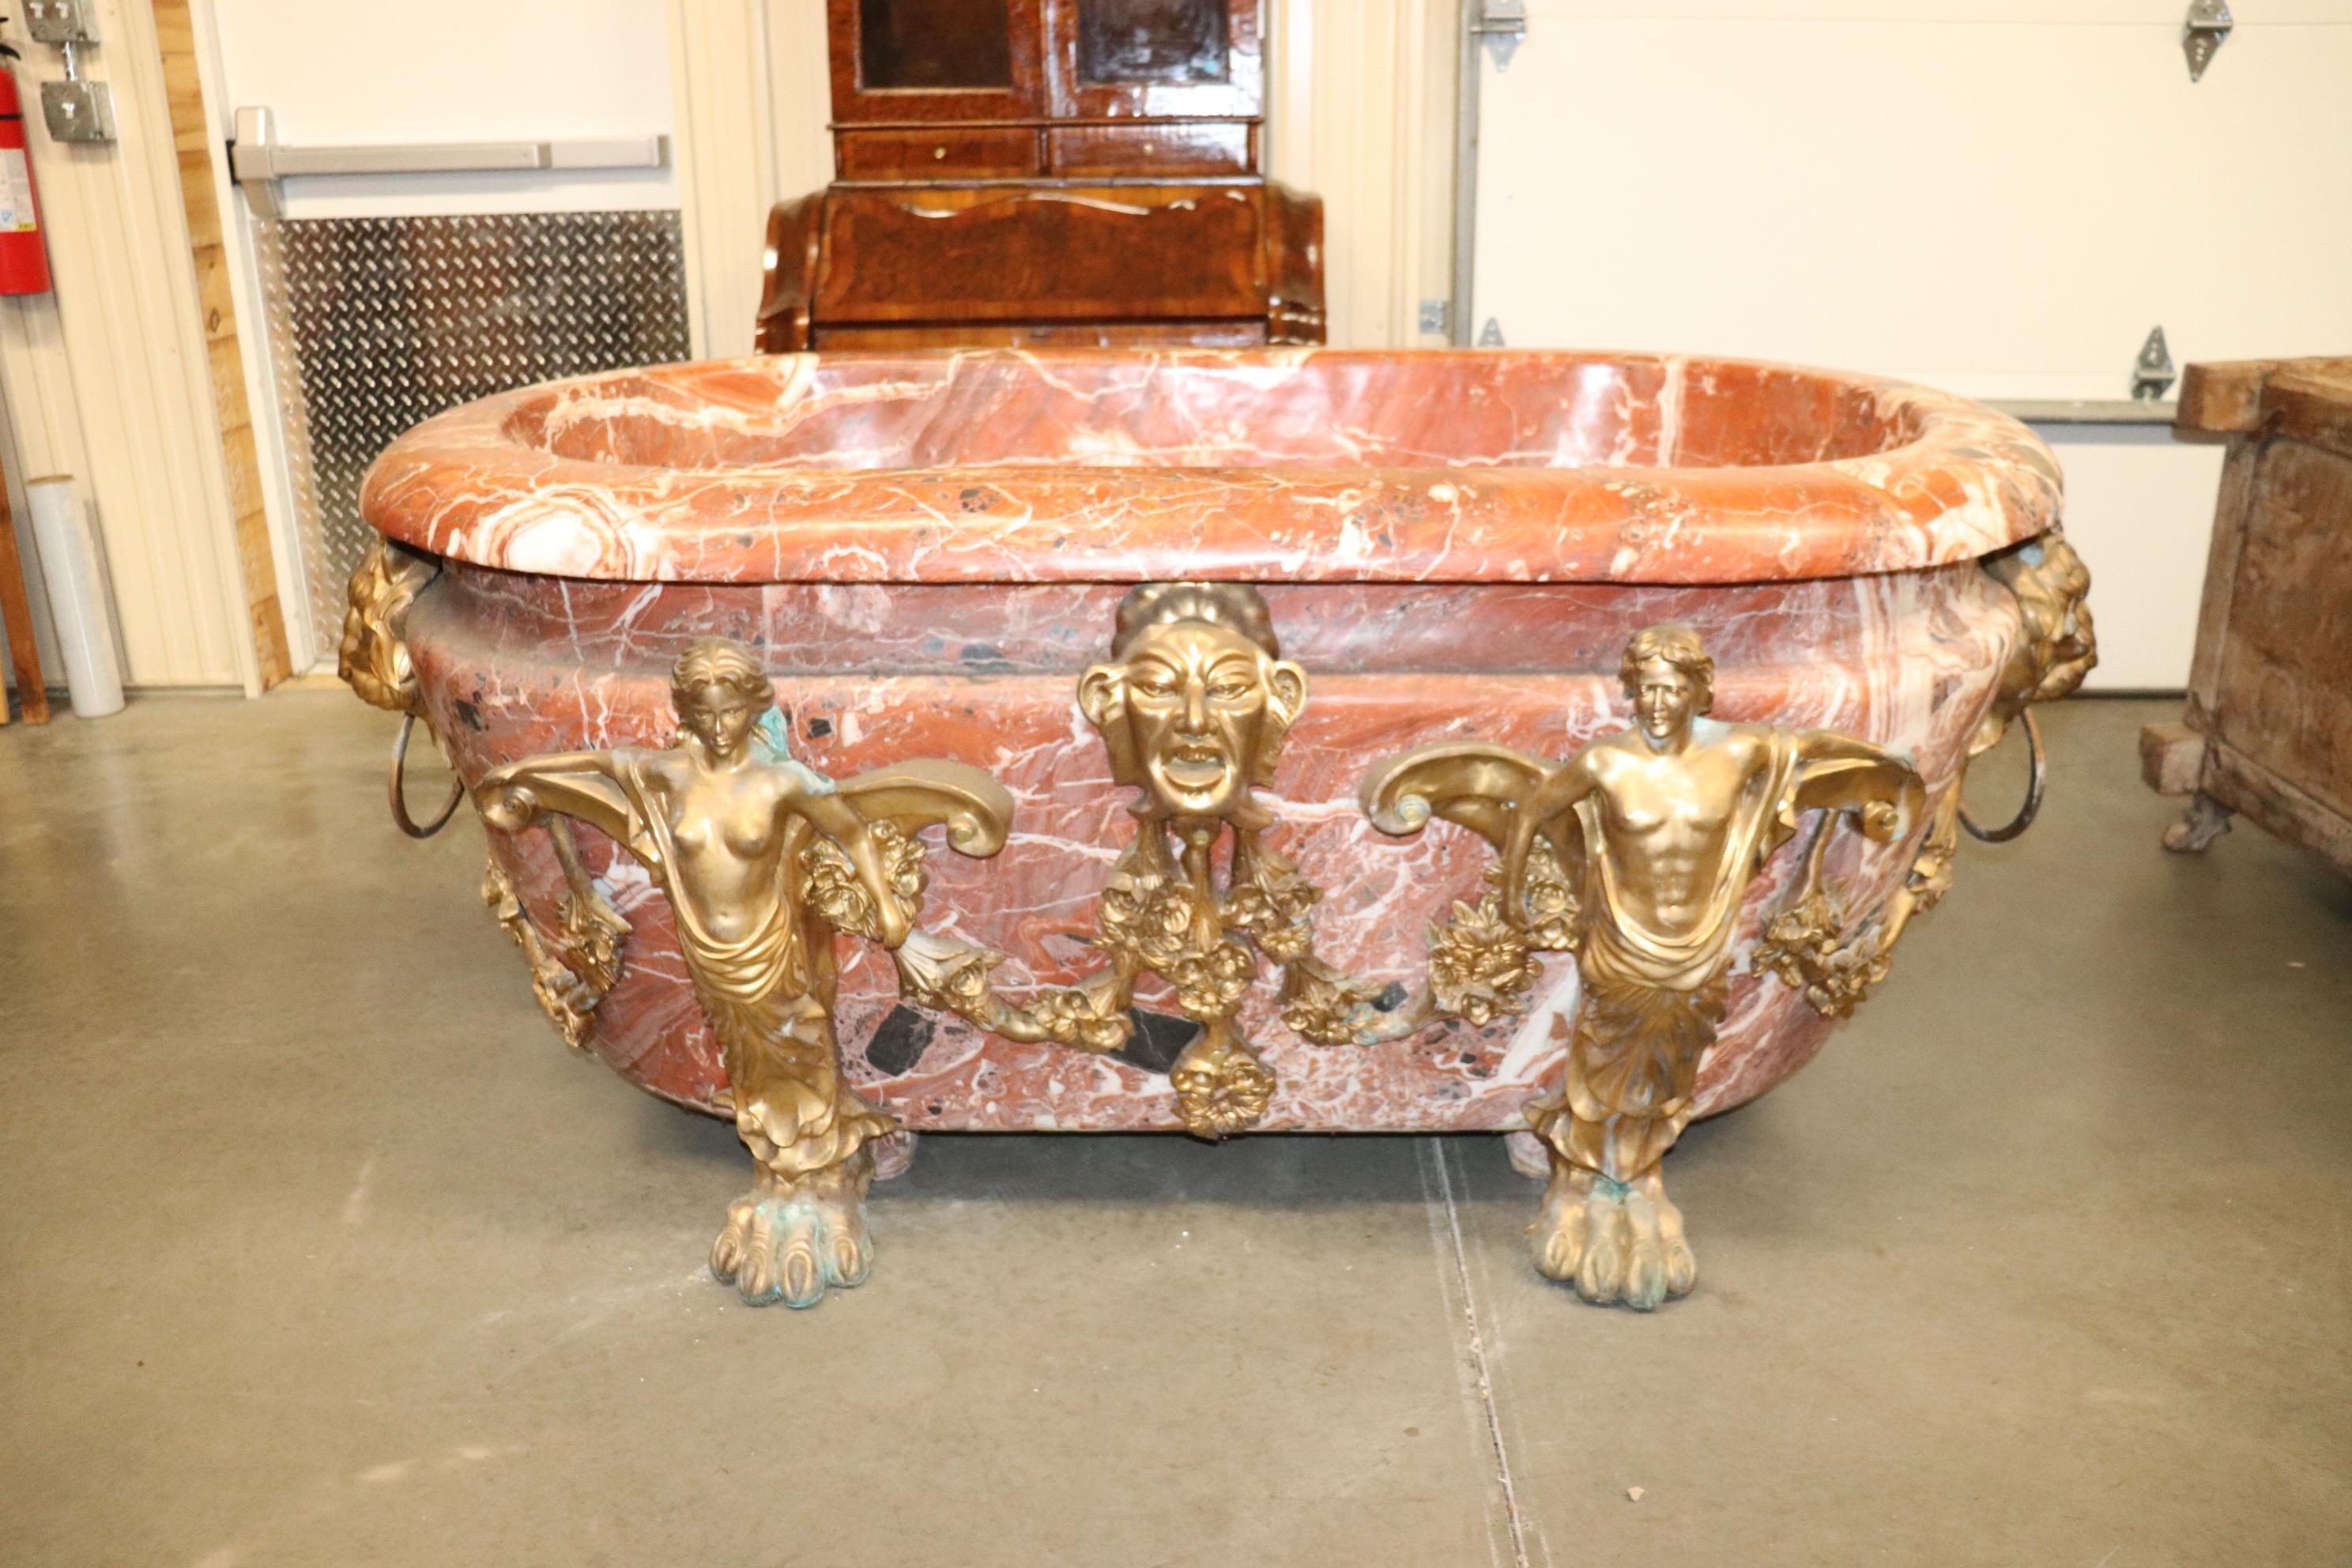 Mid-20th Century Rare Carved Solid Rouge Marble and Figural Bronze French Bathtub, circa 1930s